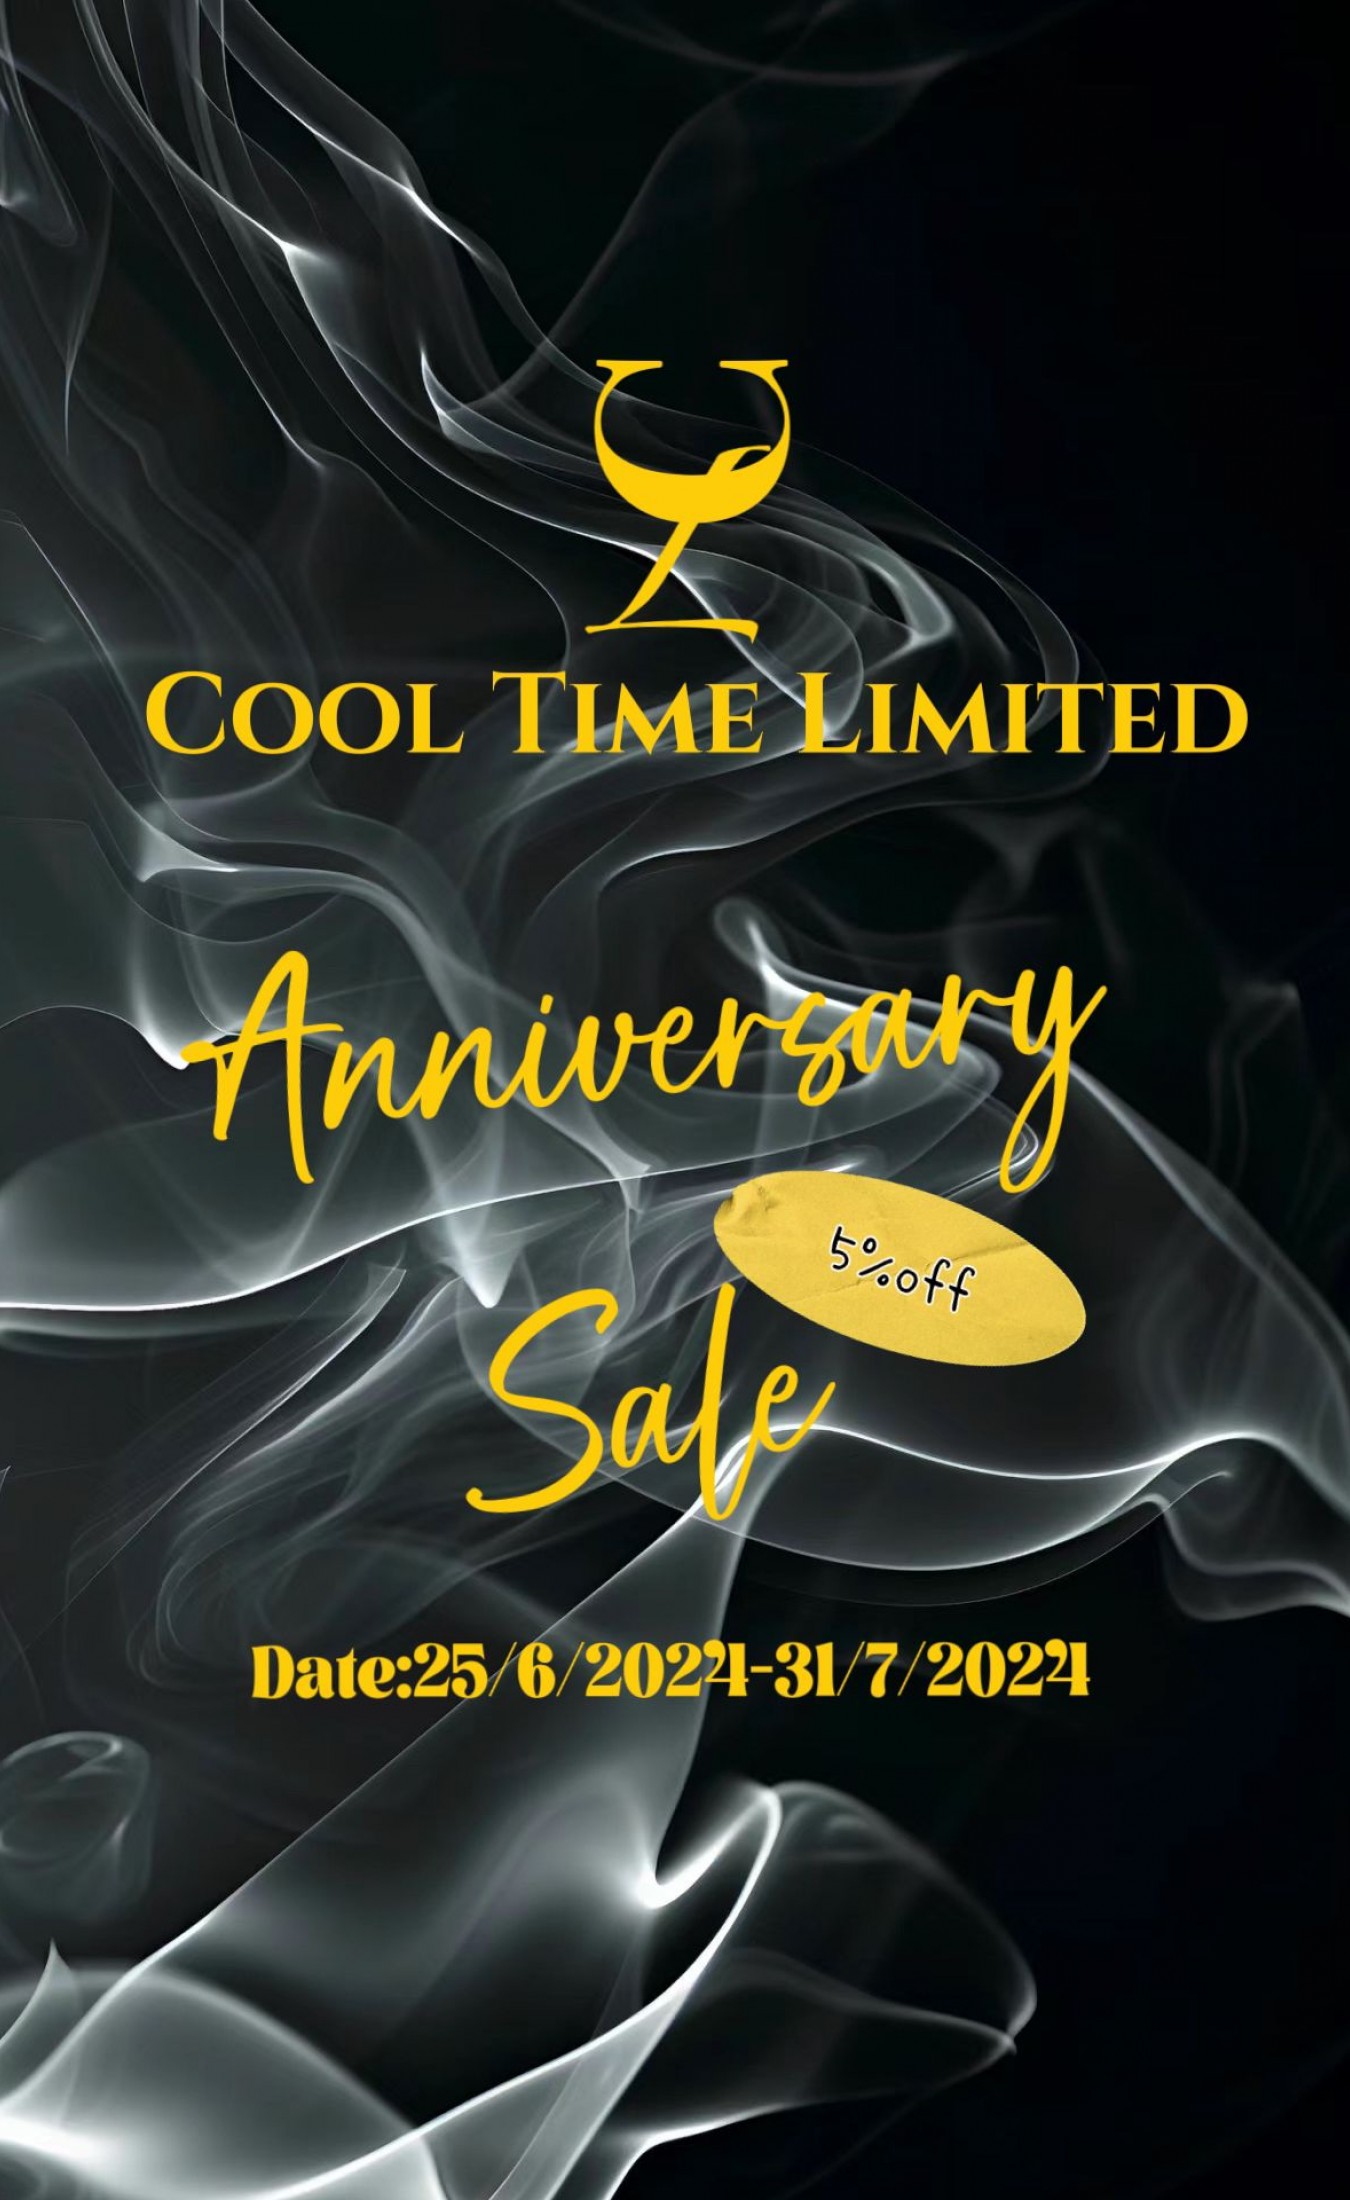 5% OFF ANNIVERSARY OFFER